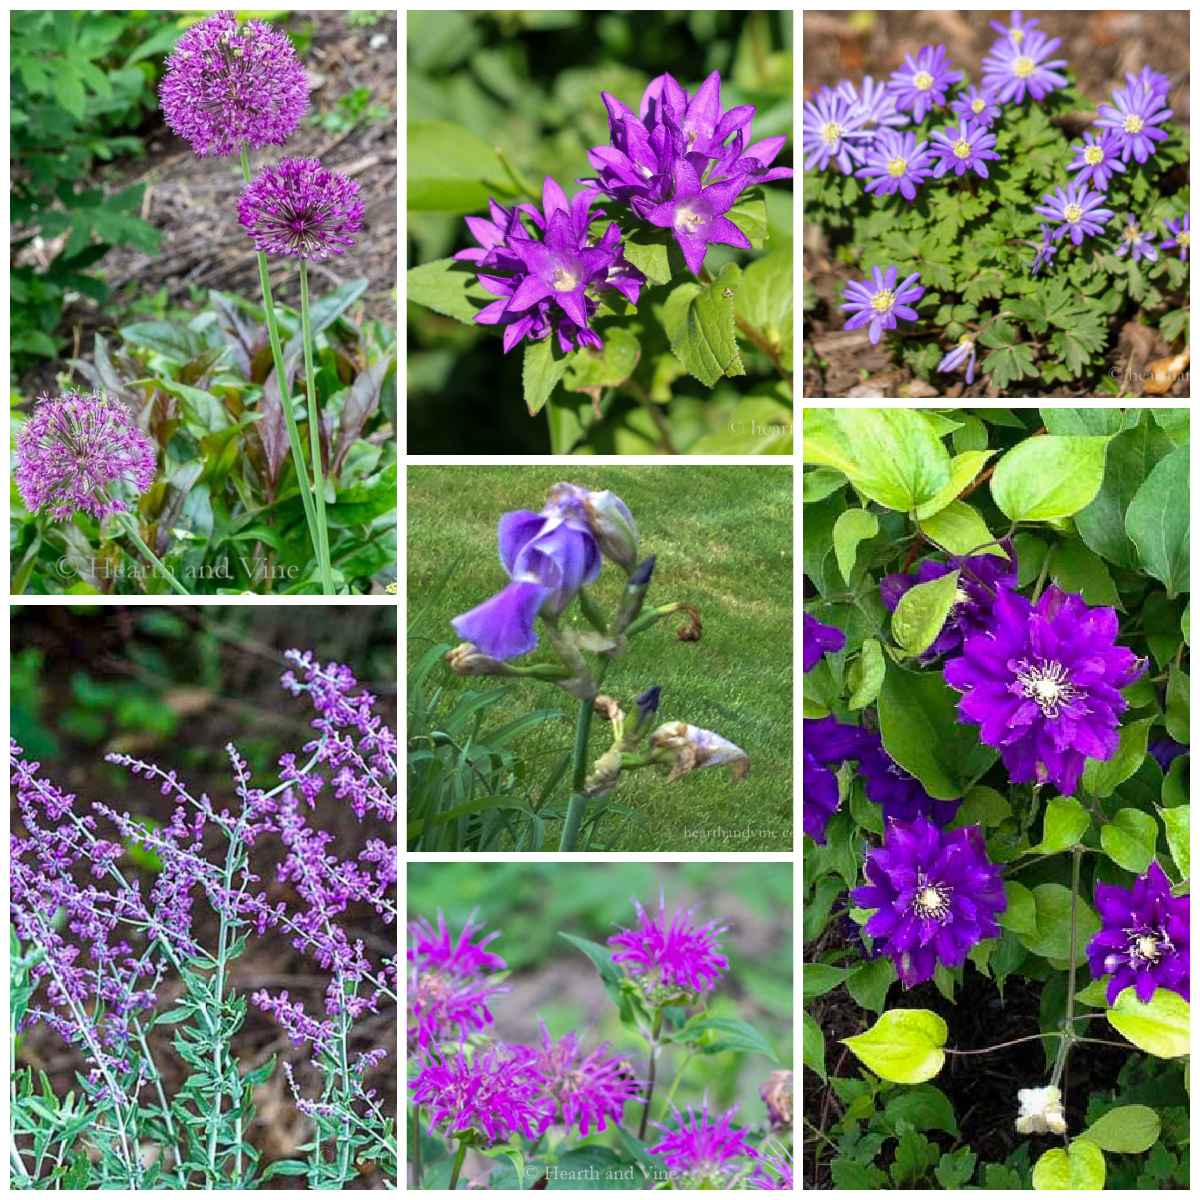 Collage of purple perennials flowers including, iris, clematis, aster, beebalm, russian sage and bellflower.